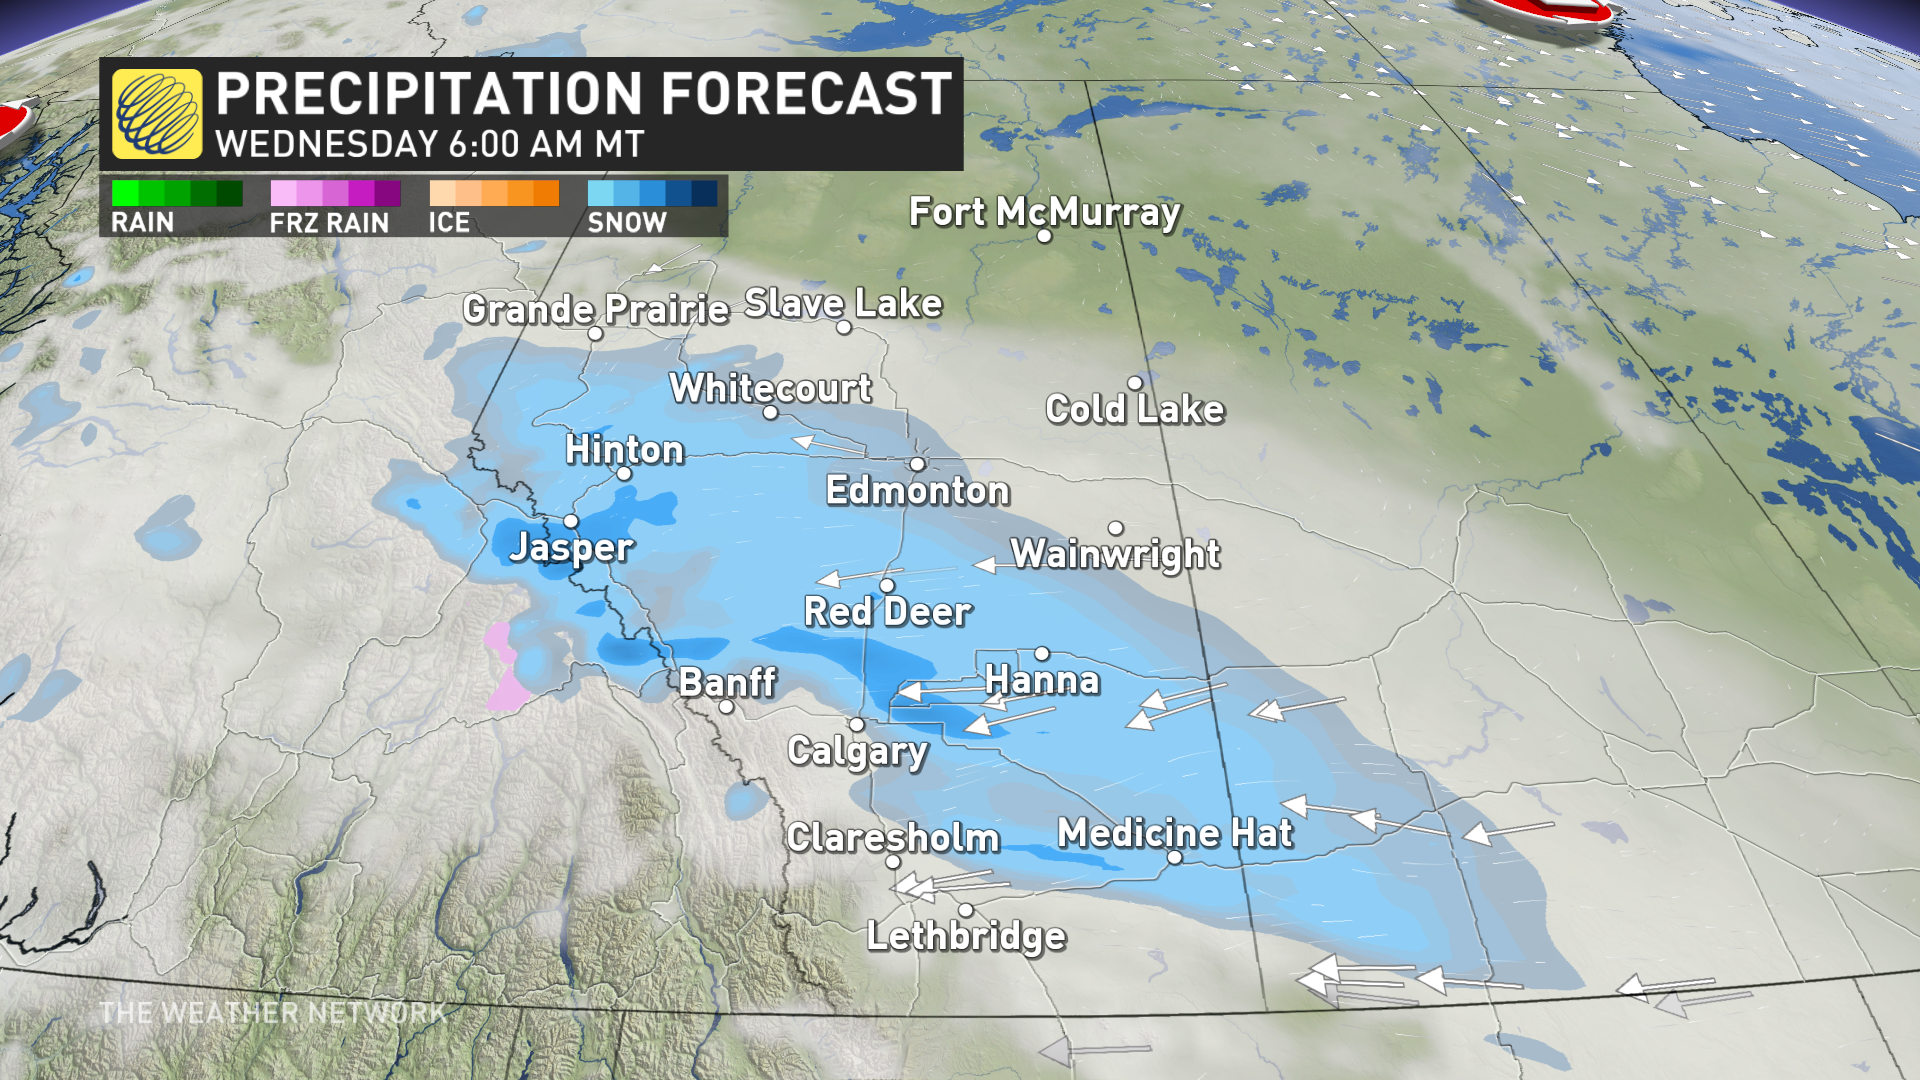 spring kicks off with heavy snow in alberta, with 30 cm possible this week